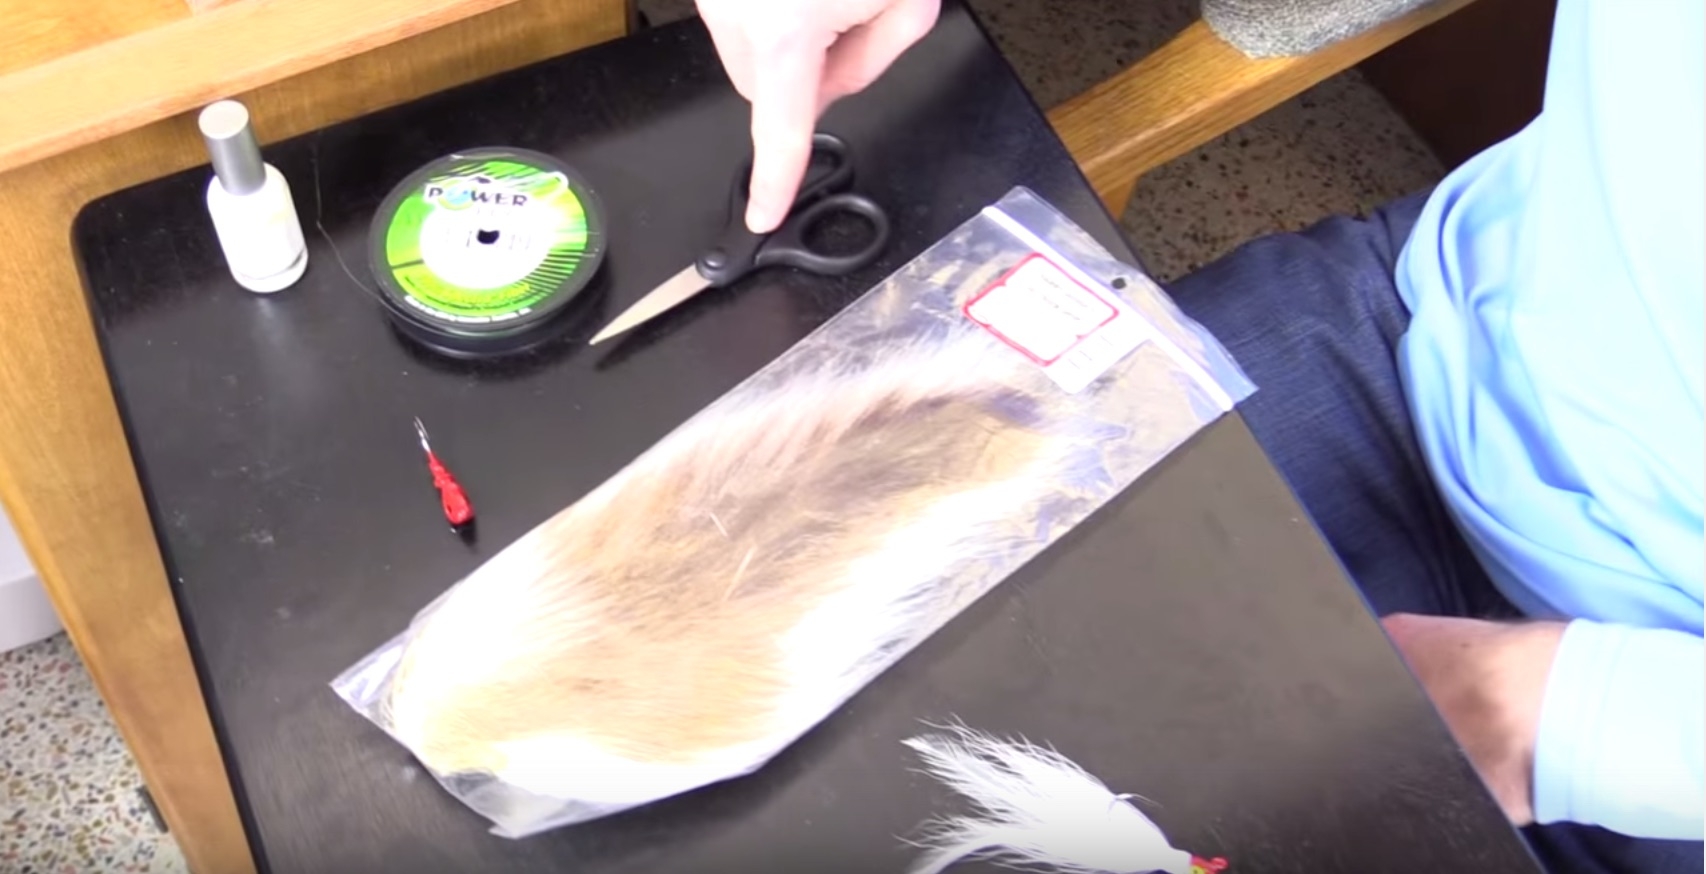 how to tie a bucktail jig